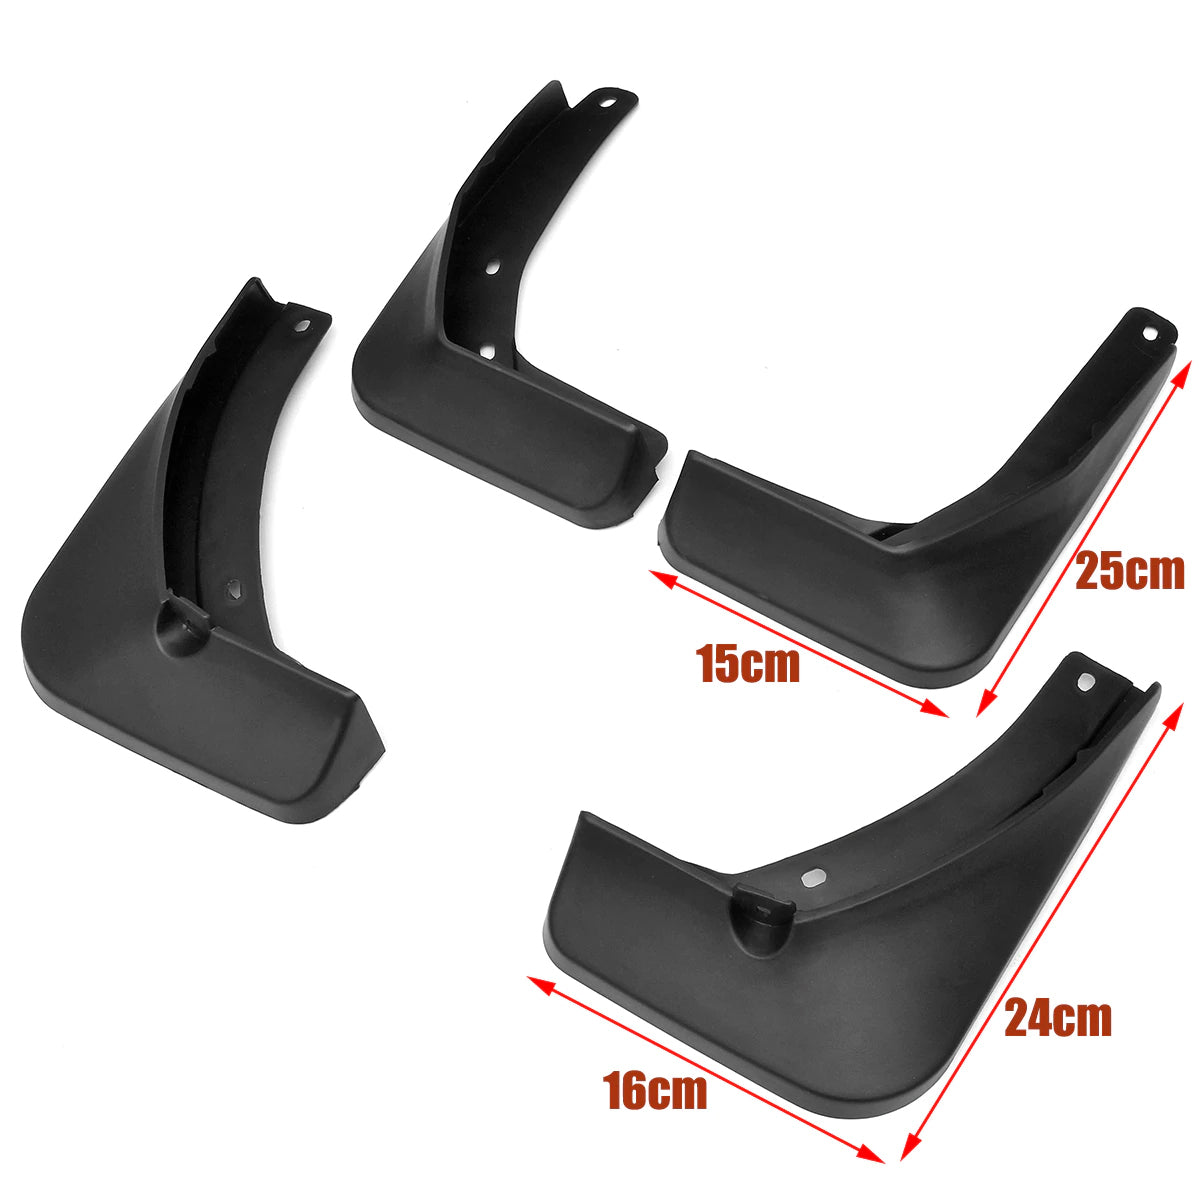 Oshotto Mud Flap (O.E.M Type) For Chevrolet Cruze 2015,2016,2017,2018,2019,2020 (T-II) (Set of 4)